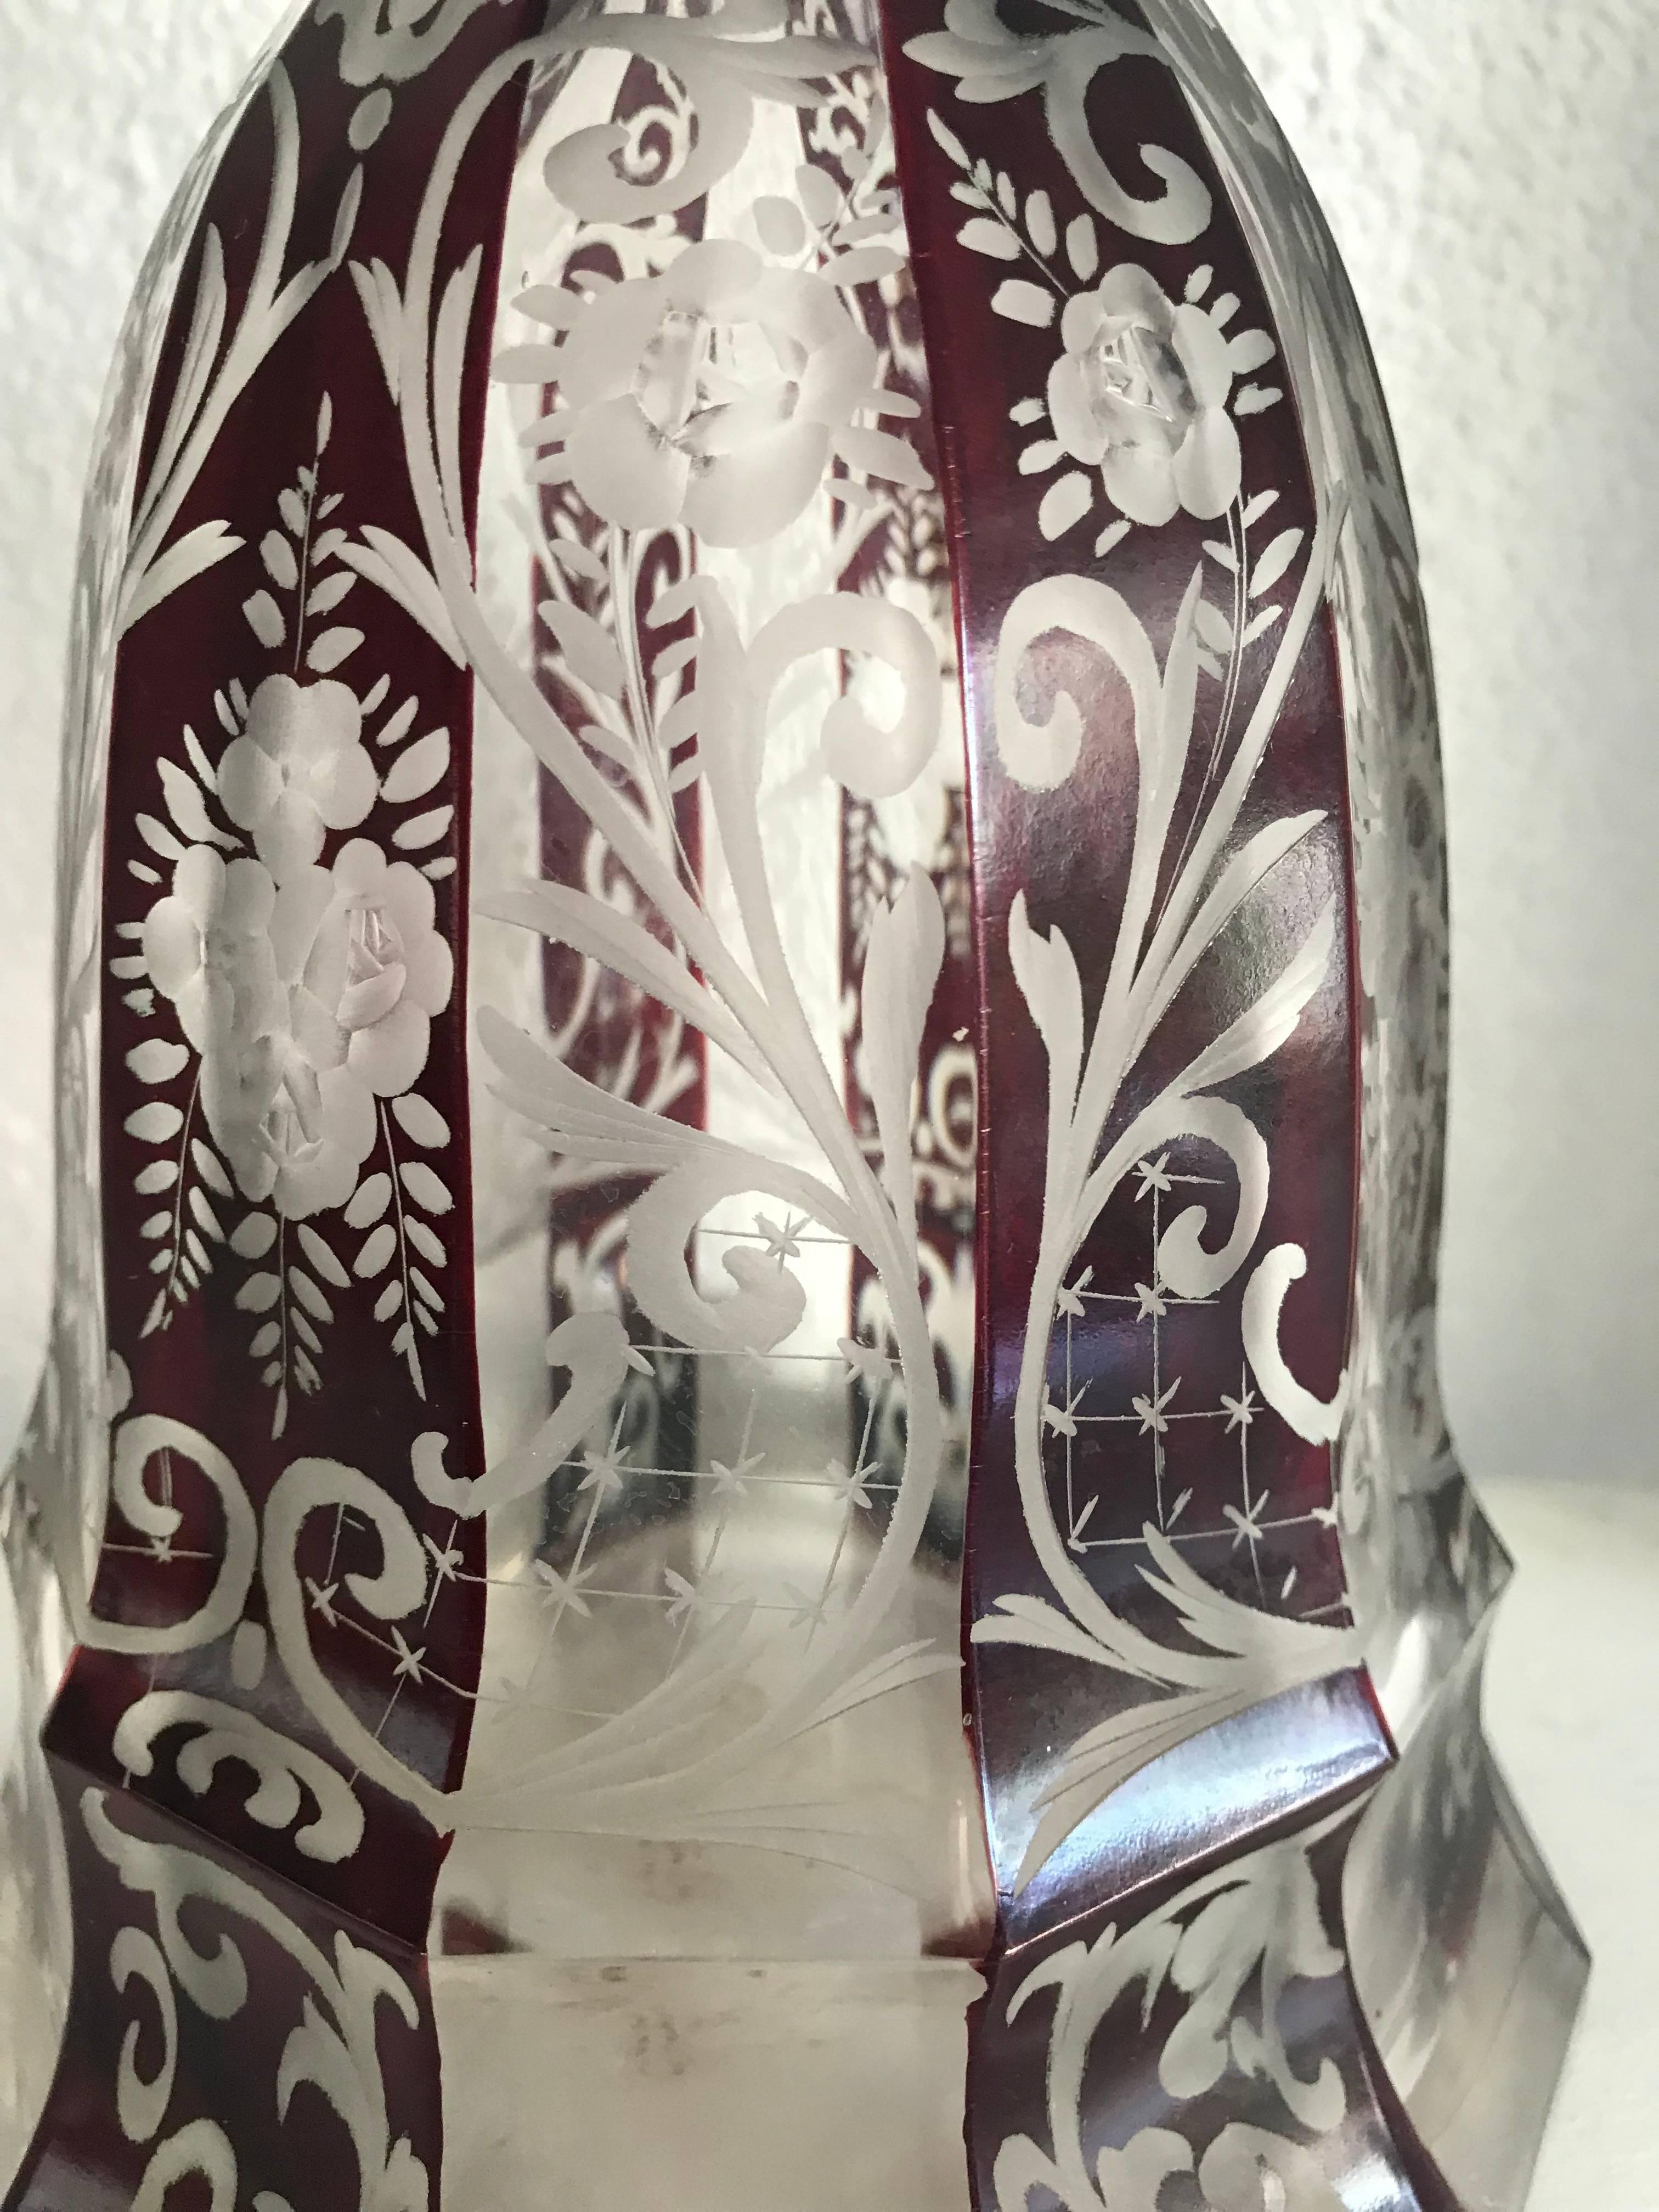 Good quality, practical and highly decorative antique decanter.

This handcrafted English decanter will look great on any drinks cabinet, table, dresser and/or side table. The bottle is beautifully and perfectly etched or hand-engraved with very